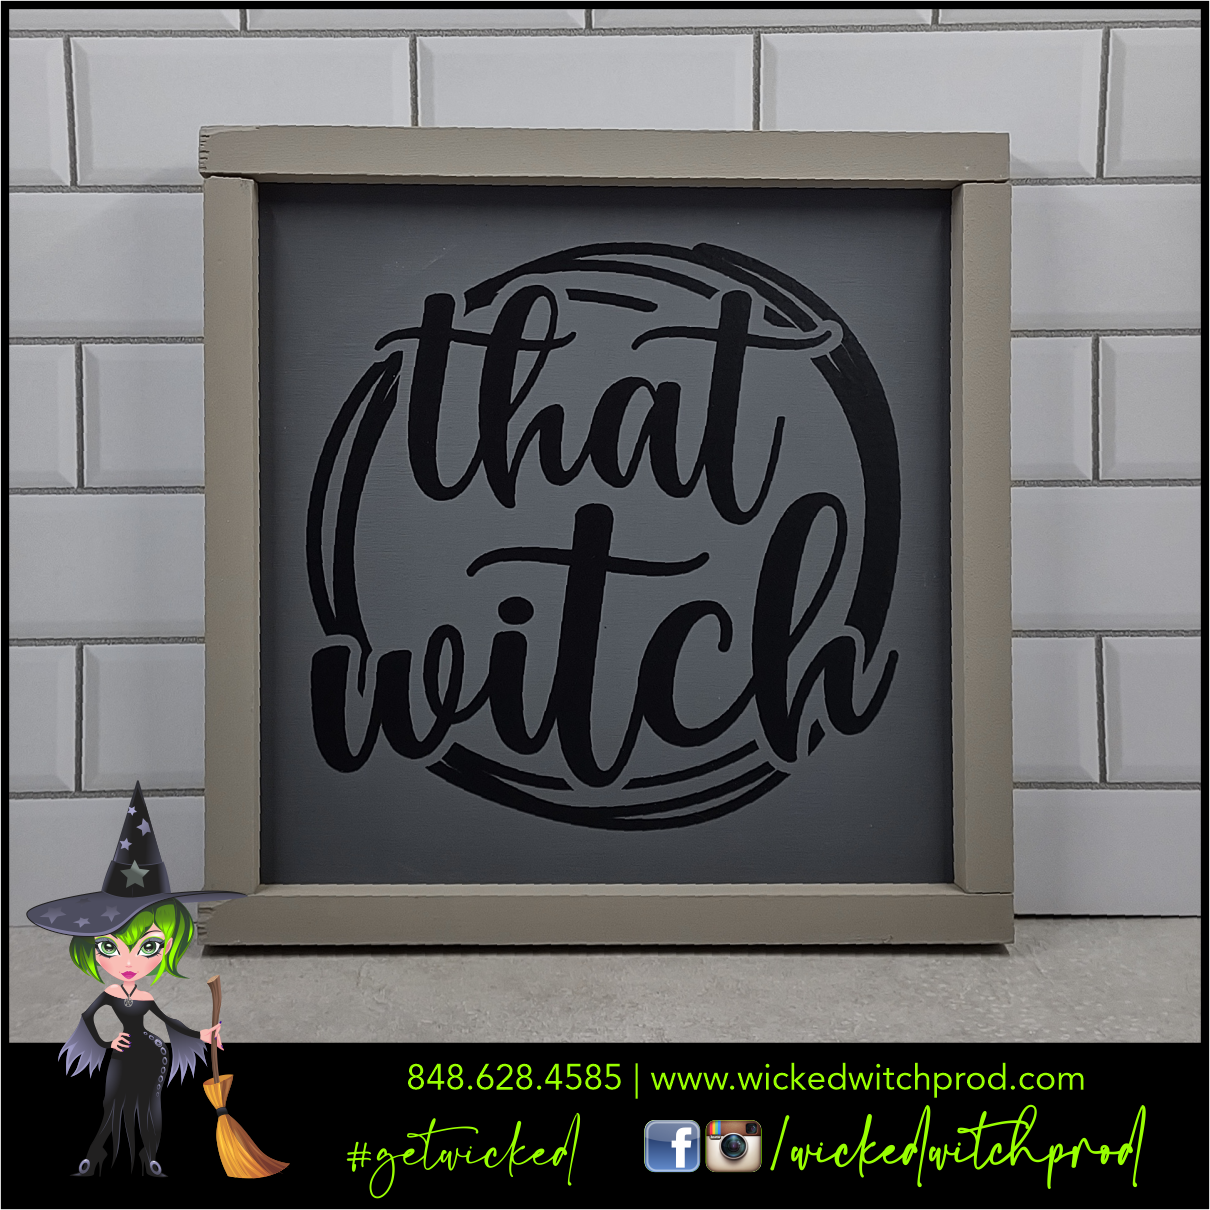 That Witch Wicked Farmhouse Sign